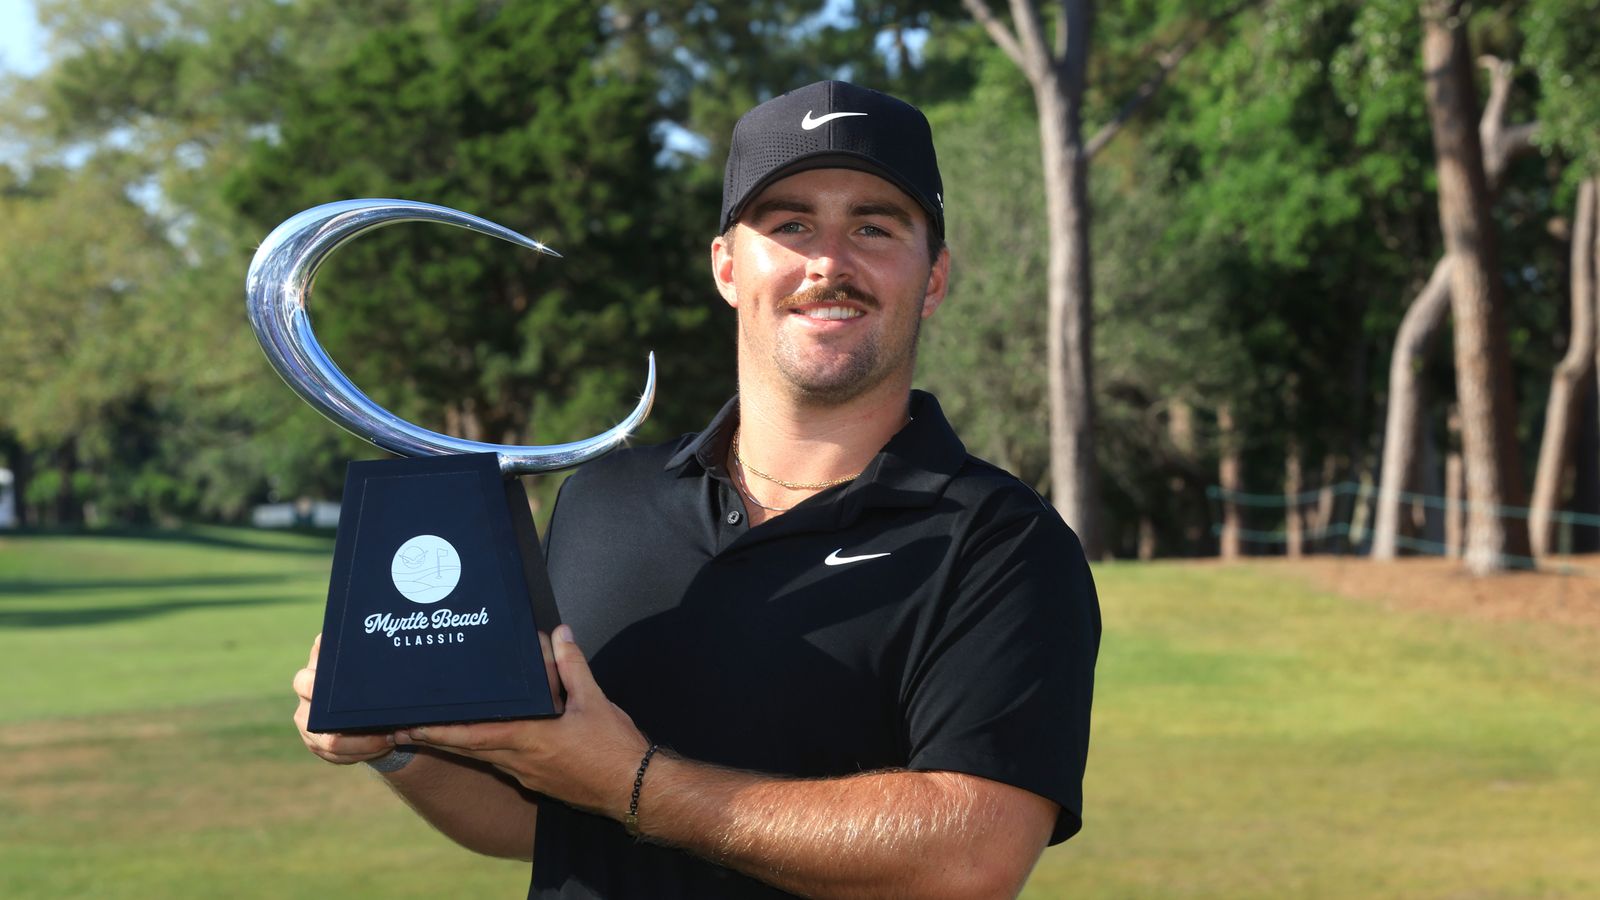 Myrtle Beach Classic: Chris Gotterup clinches maiden Tour title to book PGA Championship ticket | Golf News